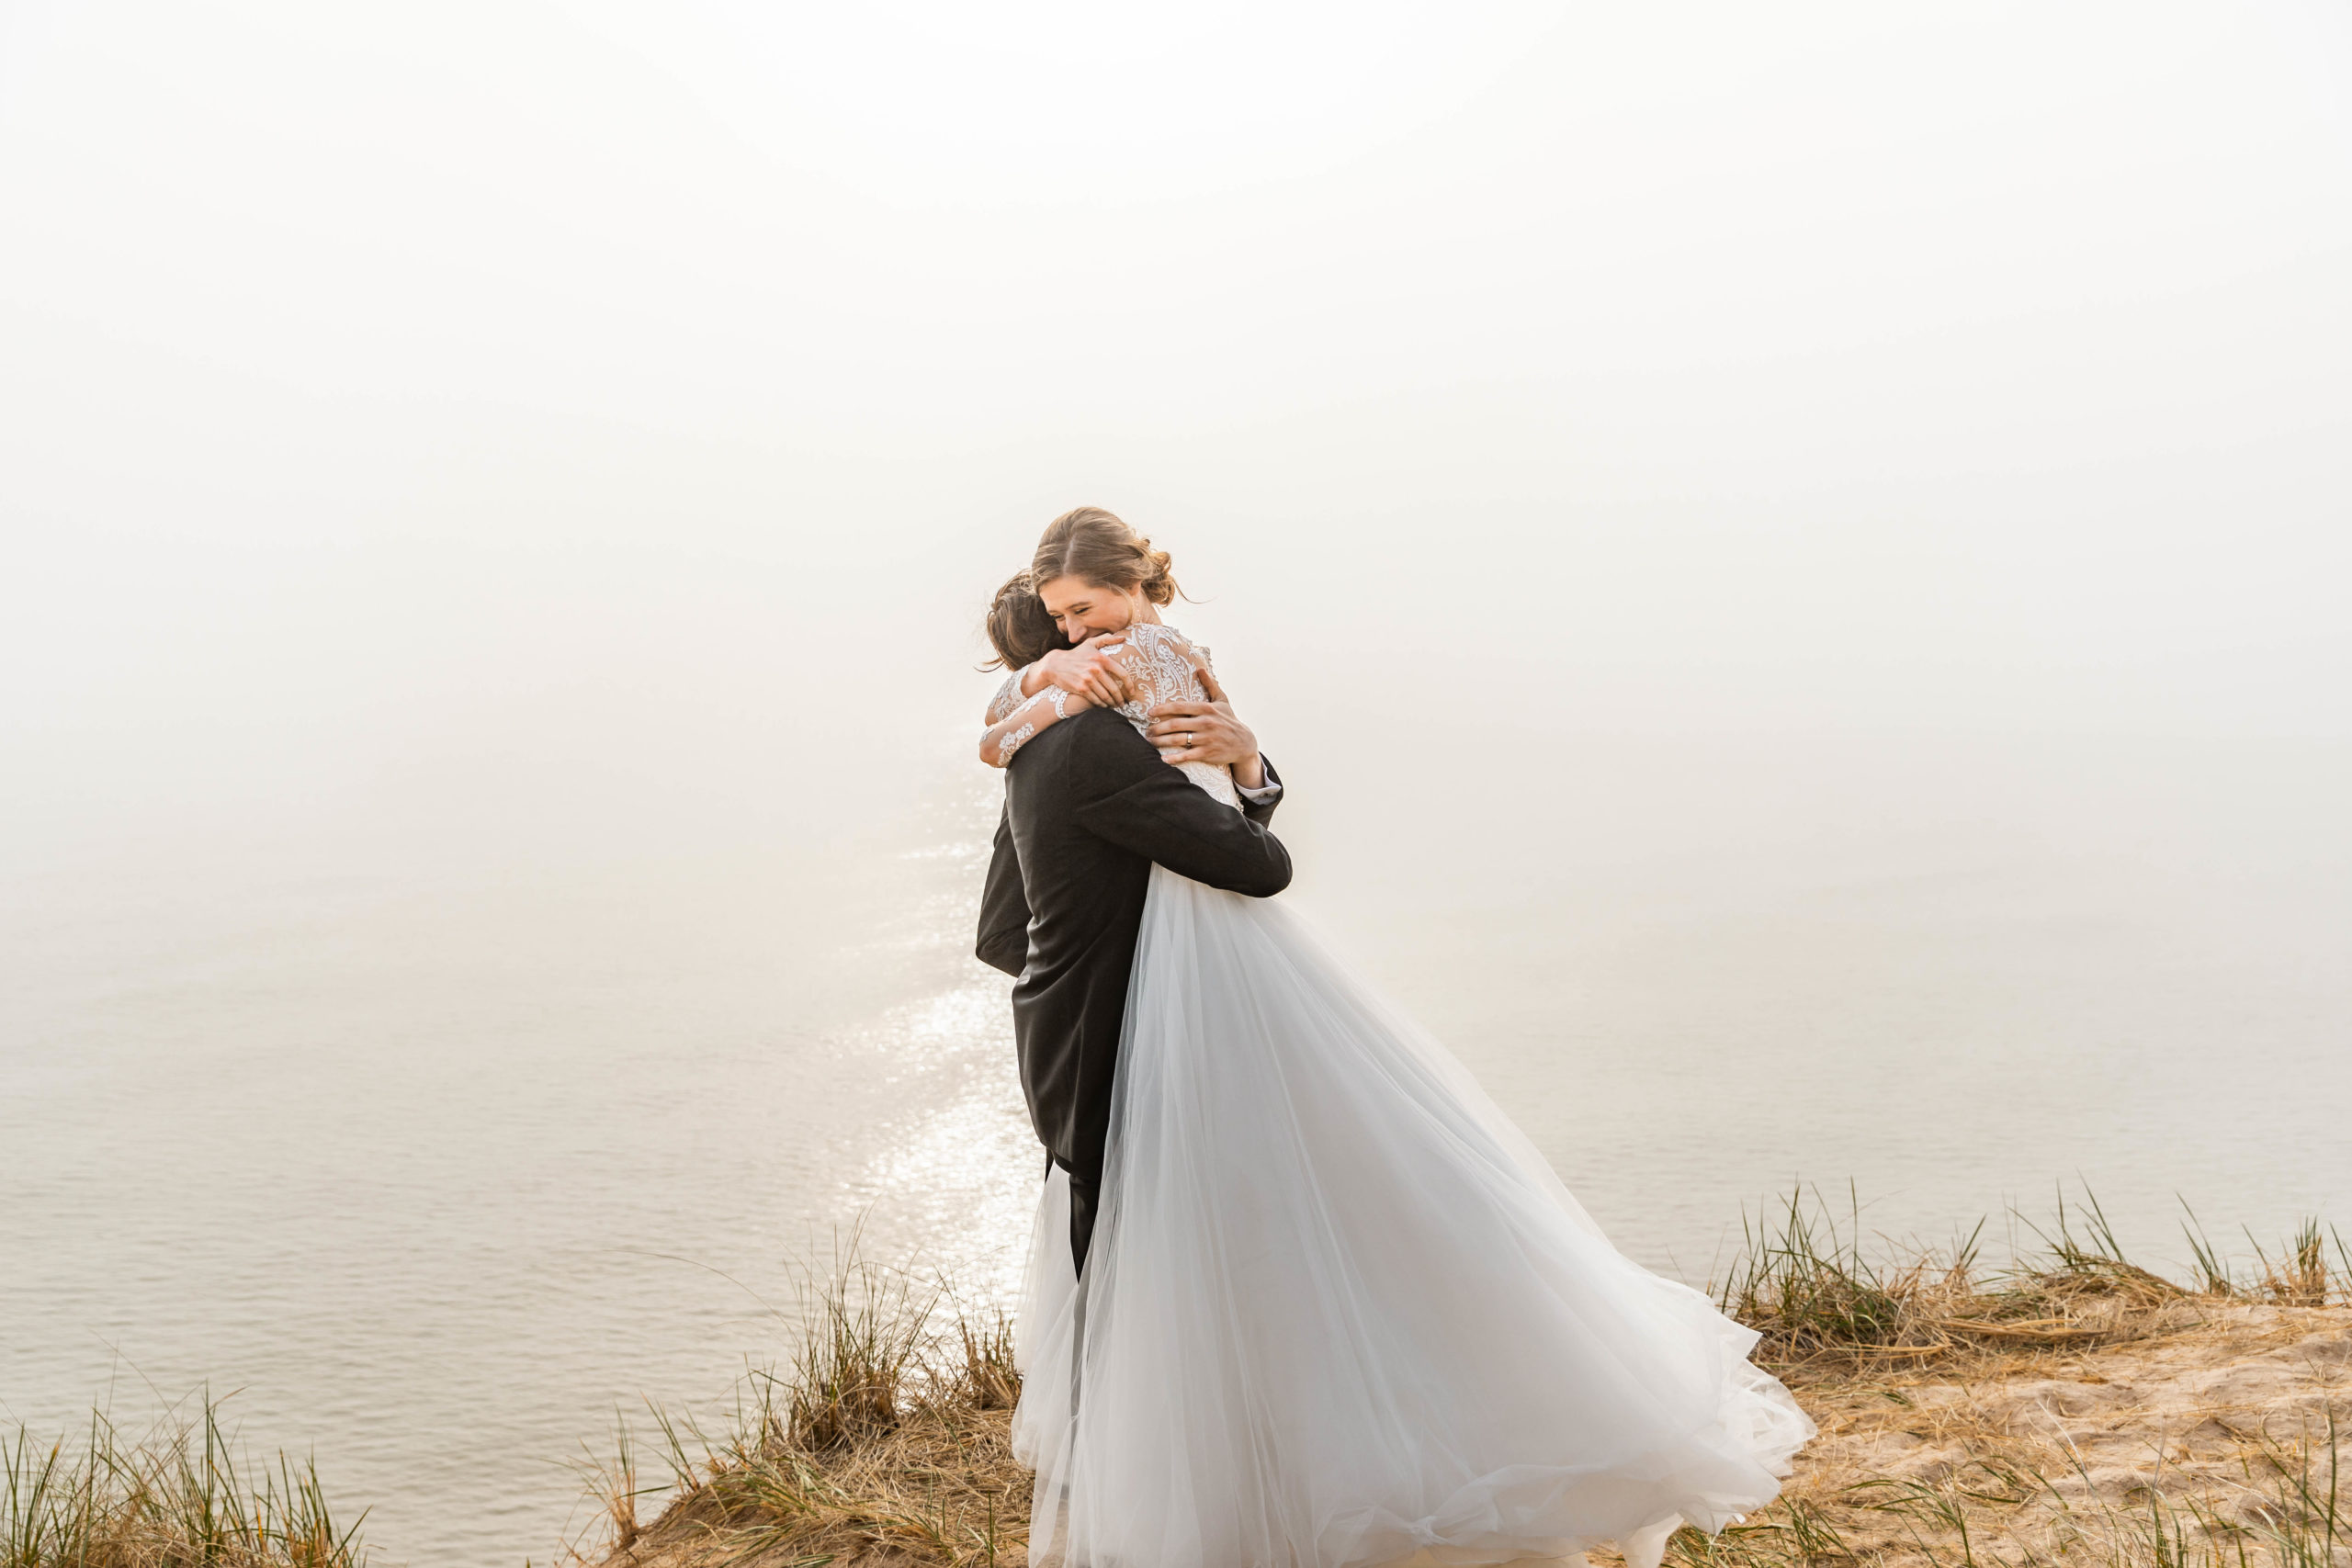 Bride and Groom hugging on sand dune elopement in wedding dress by Lake Michigan beach